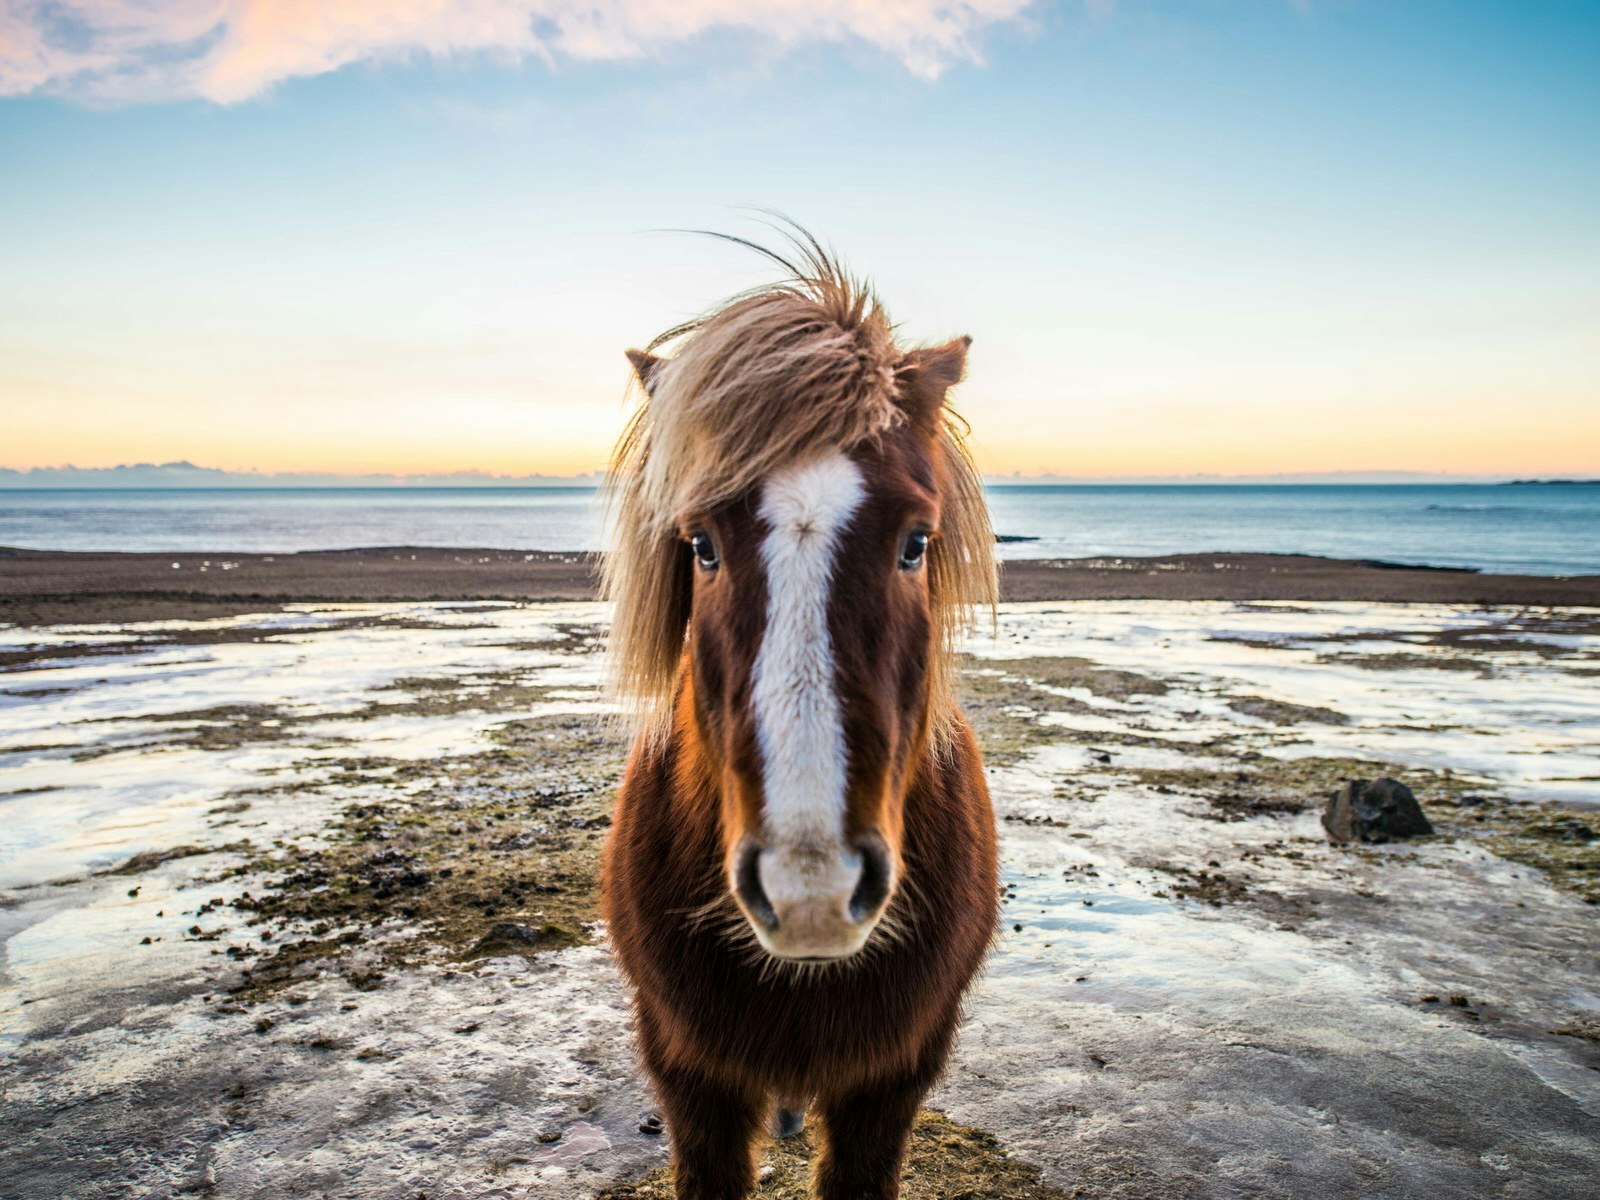 A horse stands face-on to the camera on an icy scene with the sea beyond and the sunset. The beauty (and friendly locals) make wintry Iceland one of Chris's favourite destinations © Chris Sheldrick